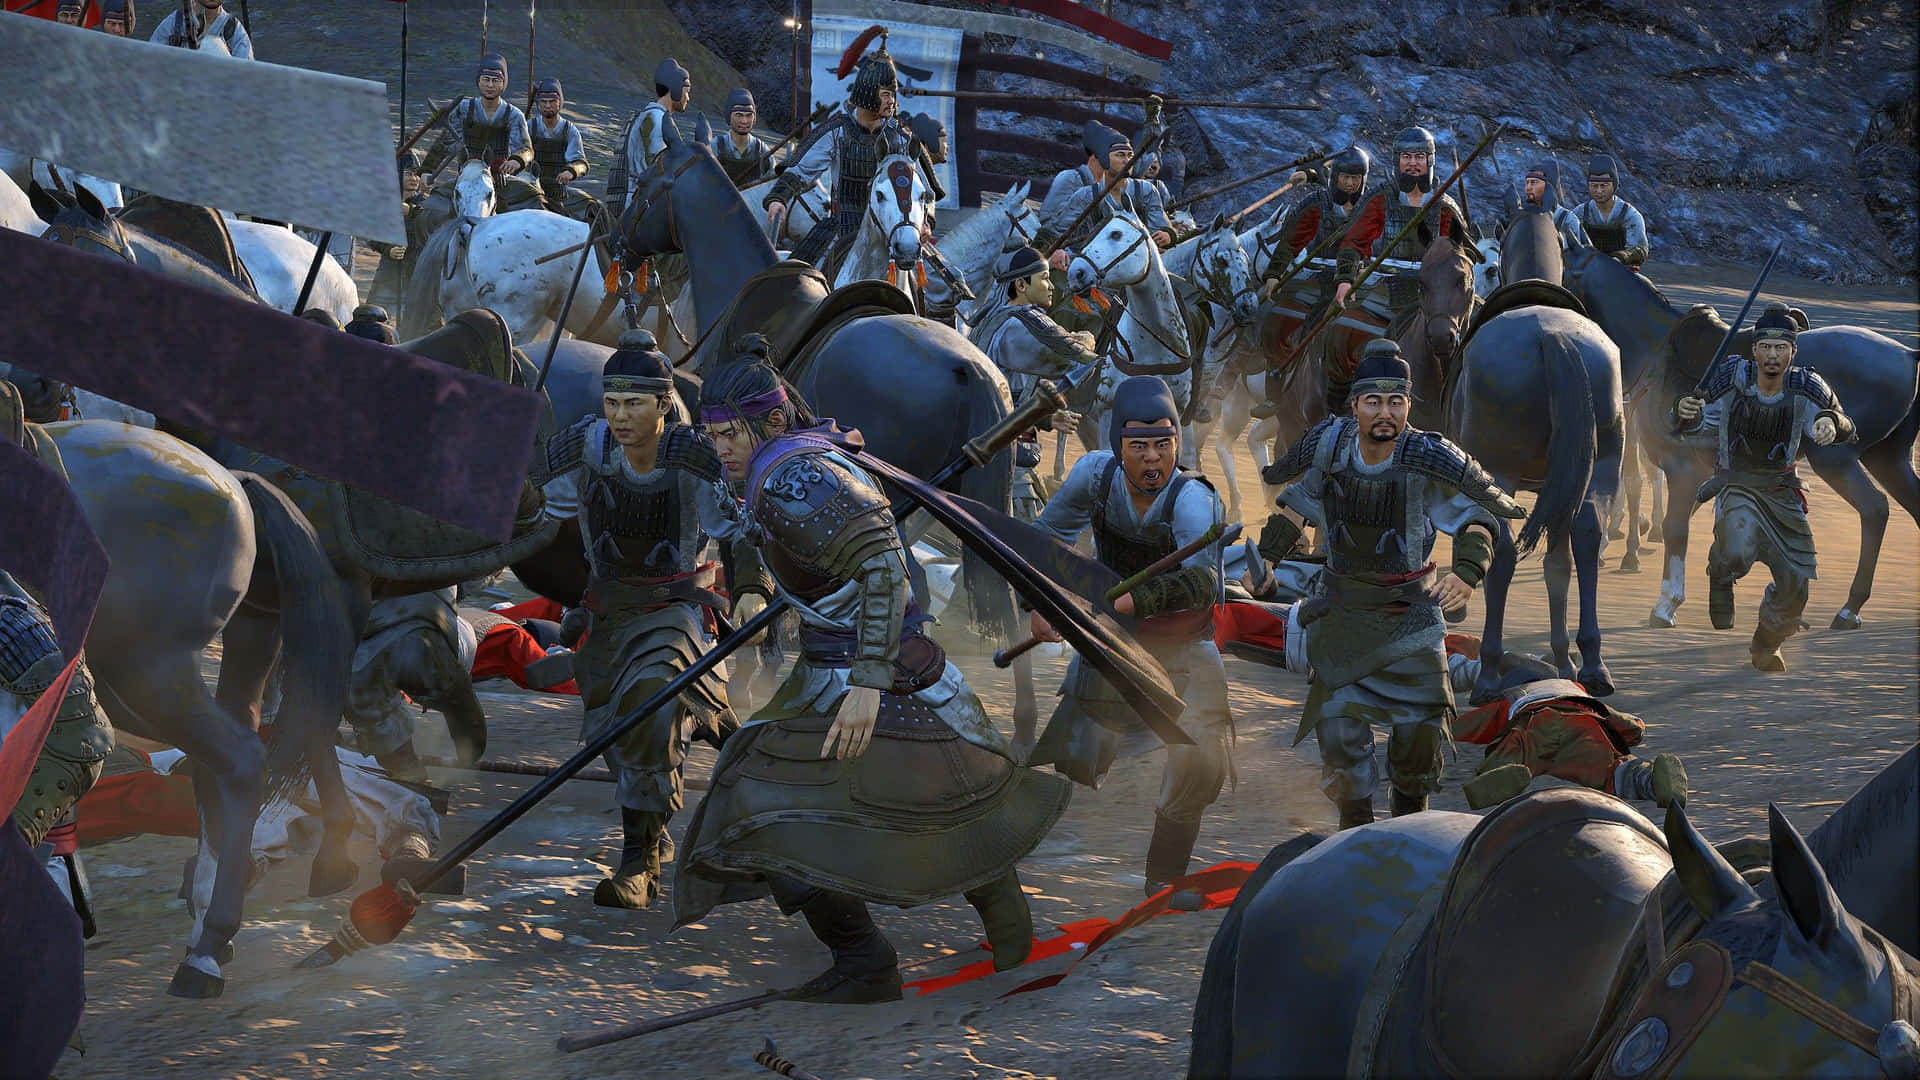 A Group Of Men On Horses Are In A Battle Background